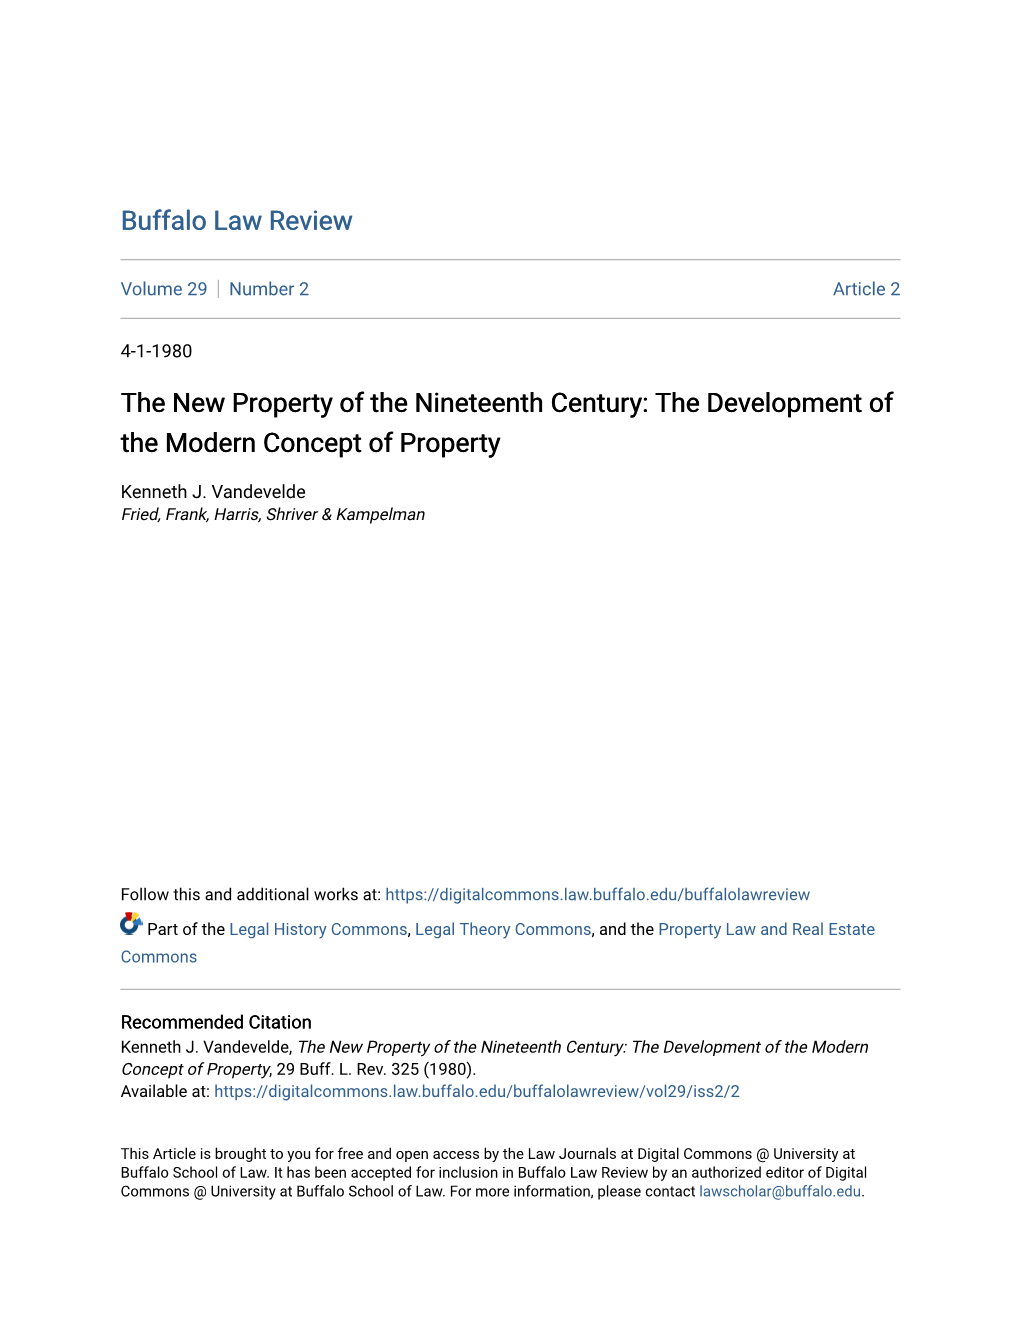 The New Property of the Nineteenth Century: the Development of the Modern Concept of Property